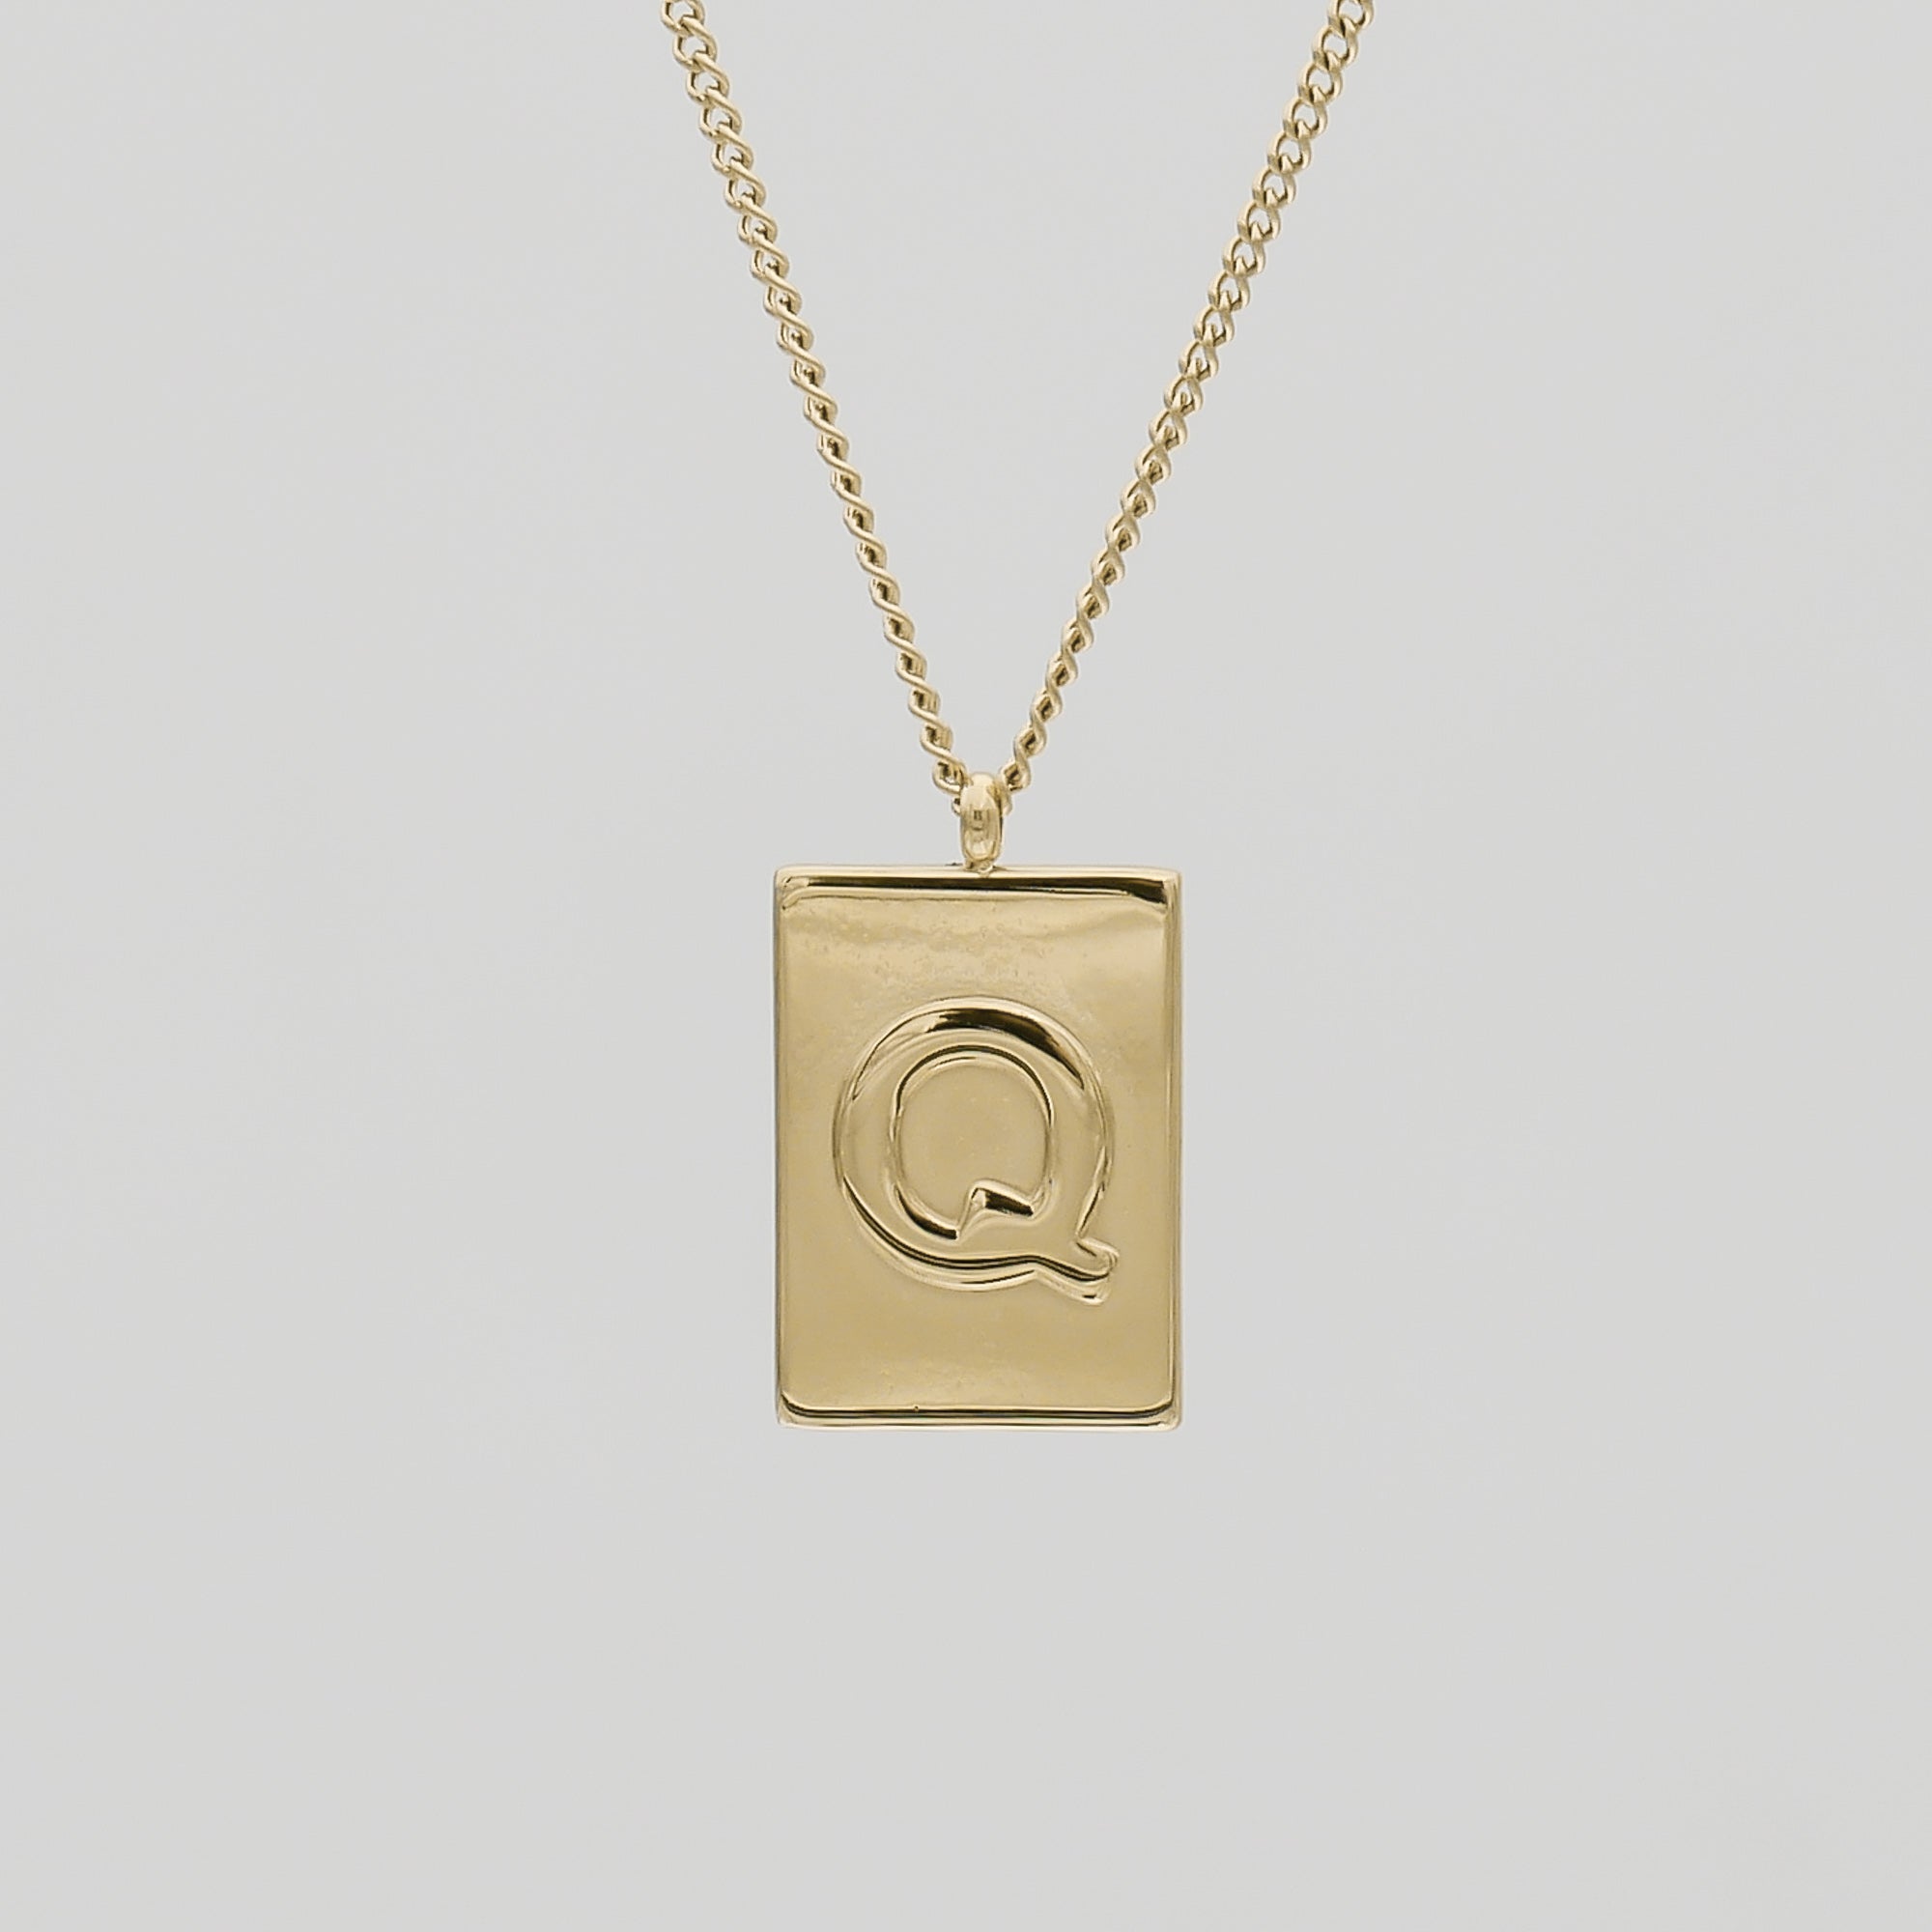 Athena custom initial Gold pendant Necklace, letter Q by PRYA